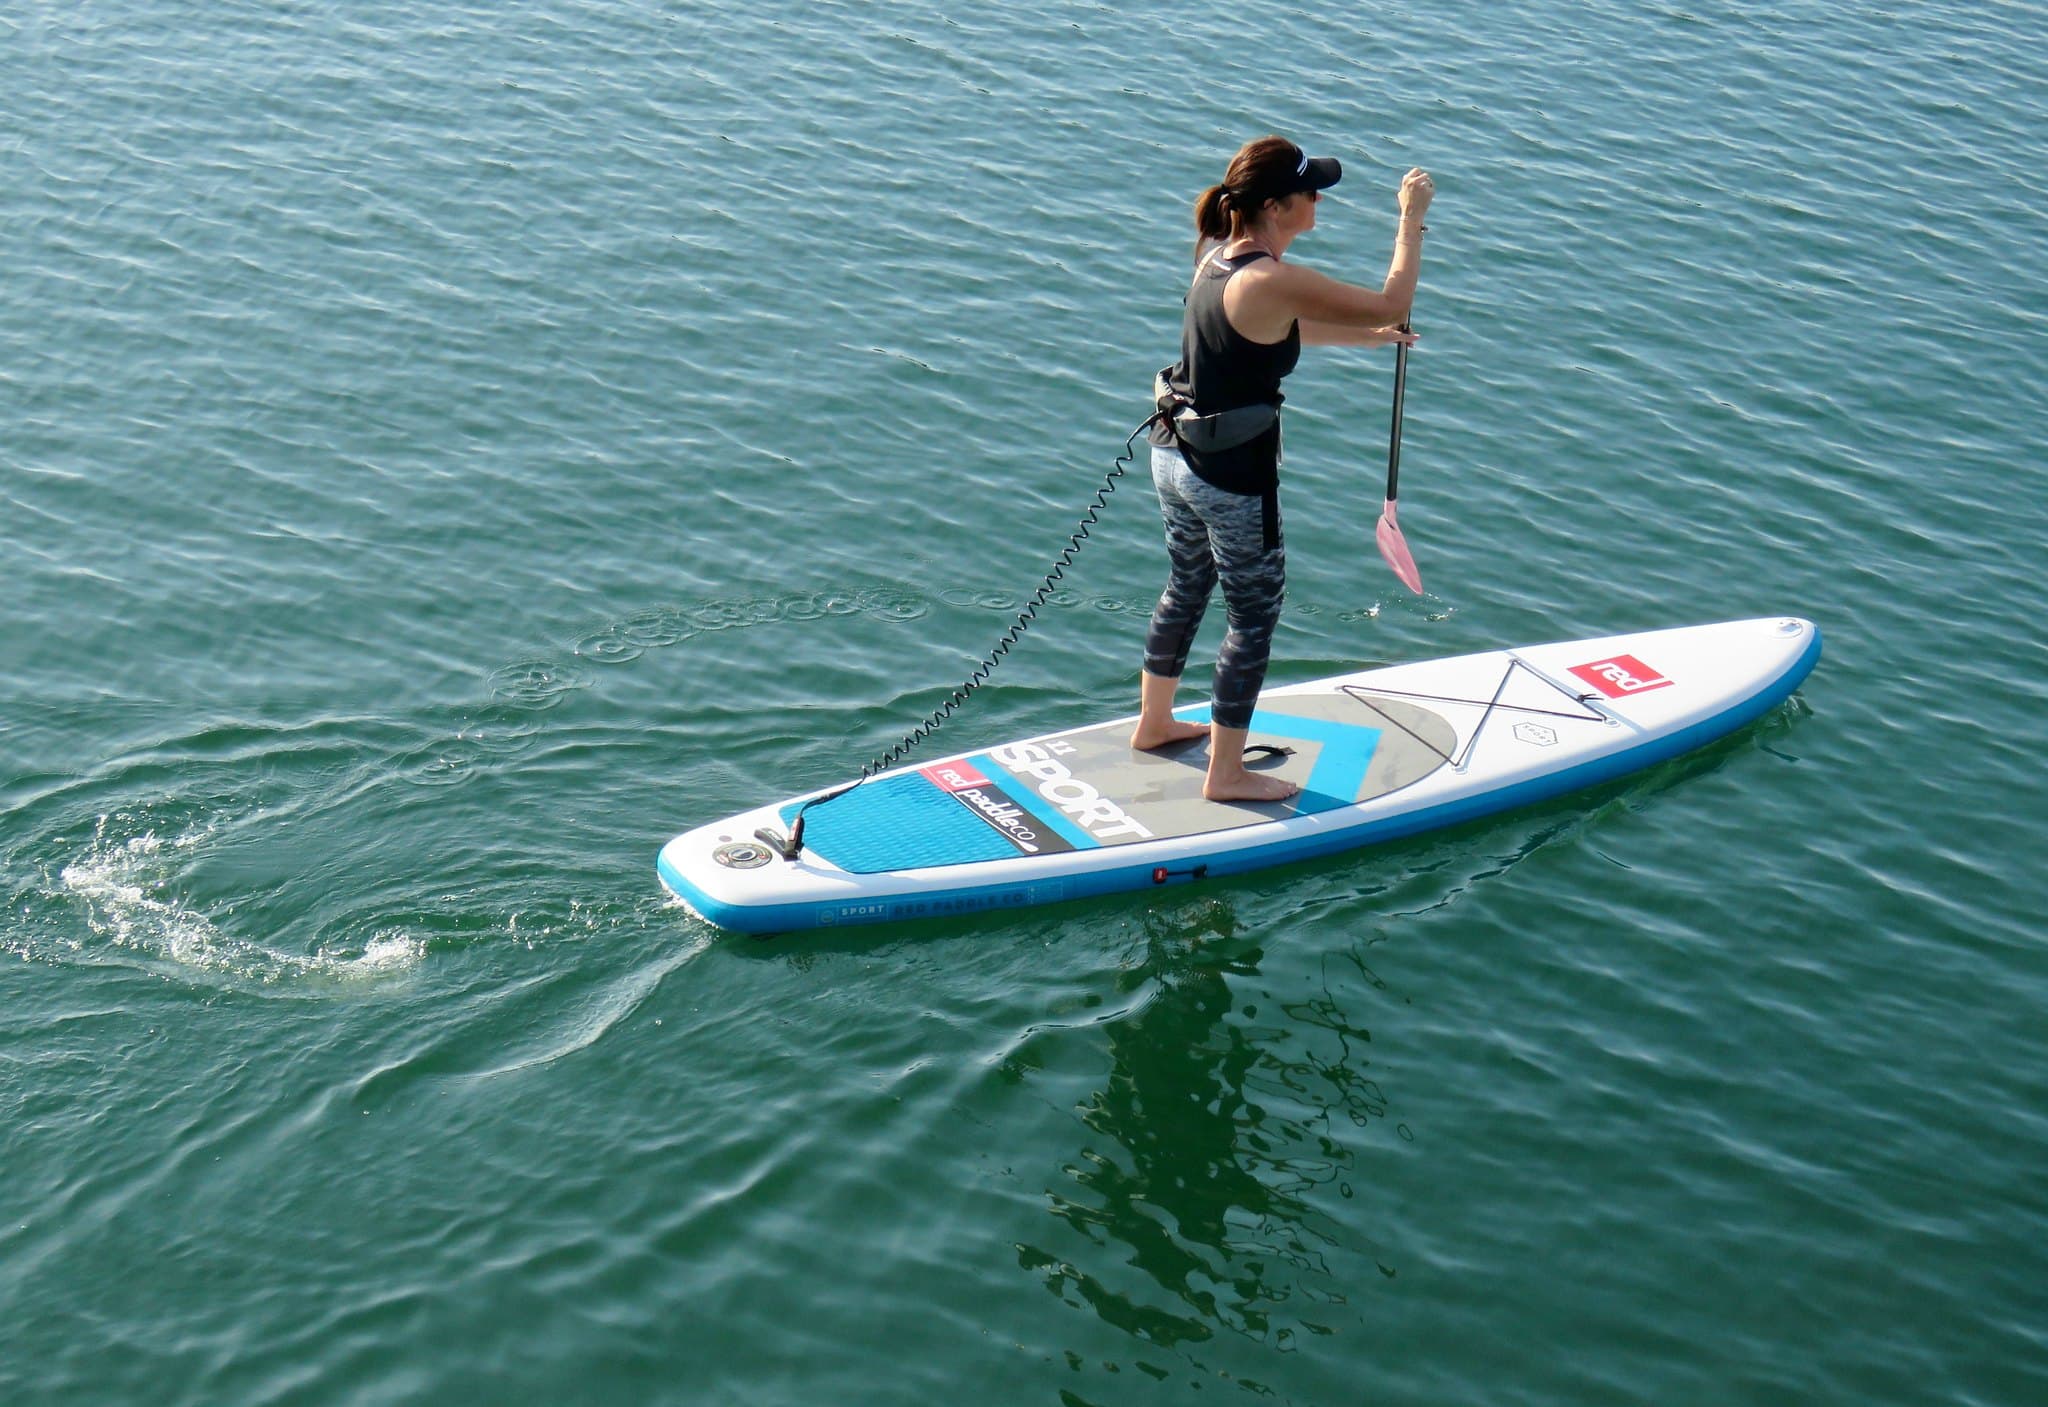 Do I need to have experience in stand-up paddle boarding